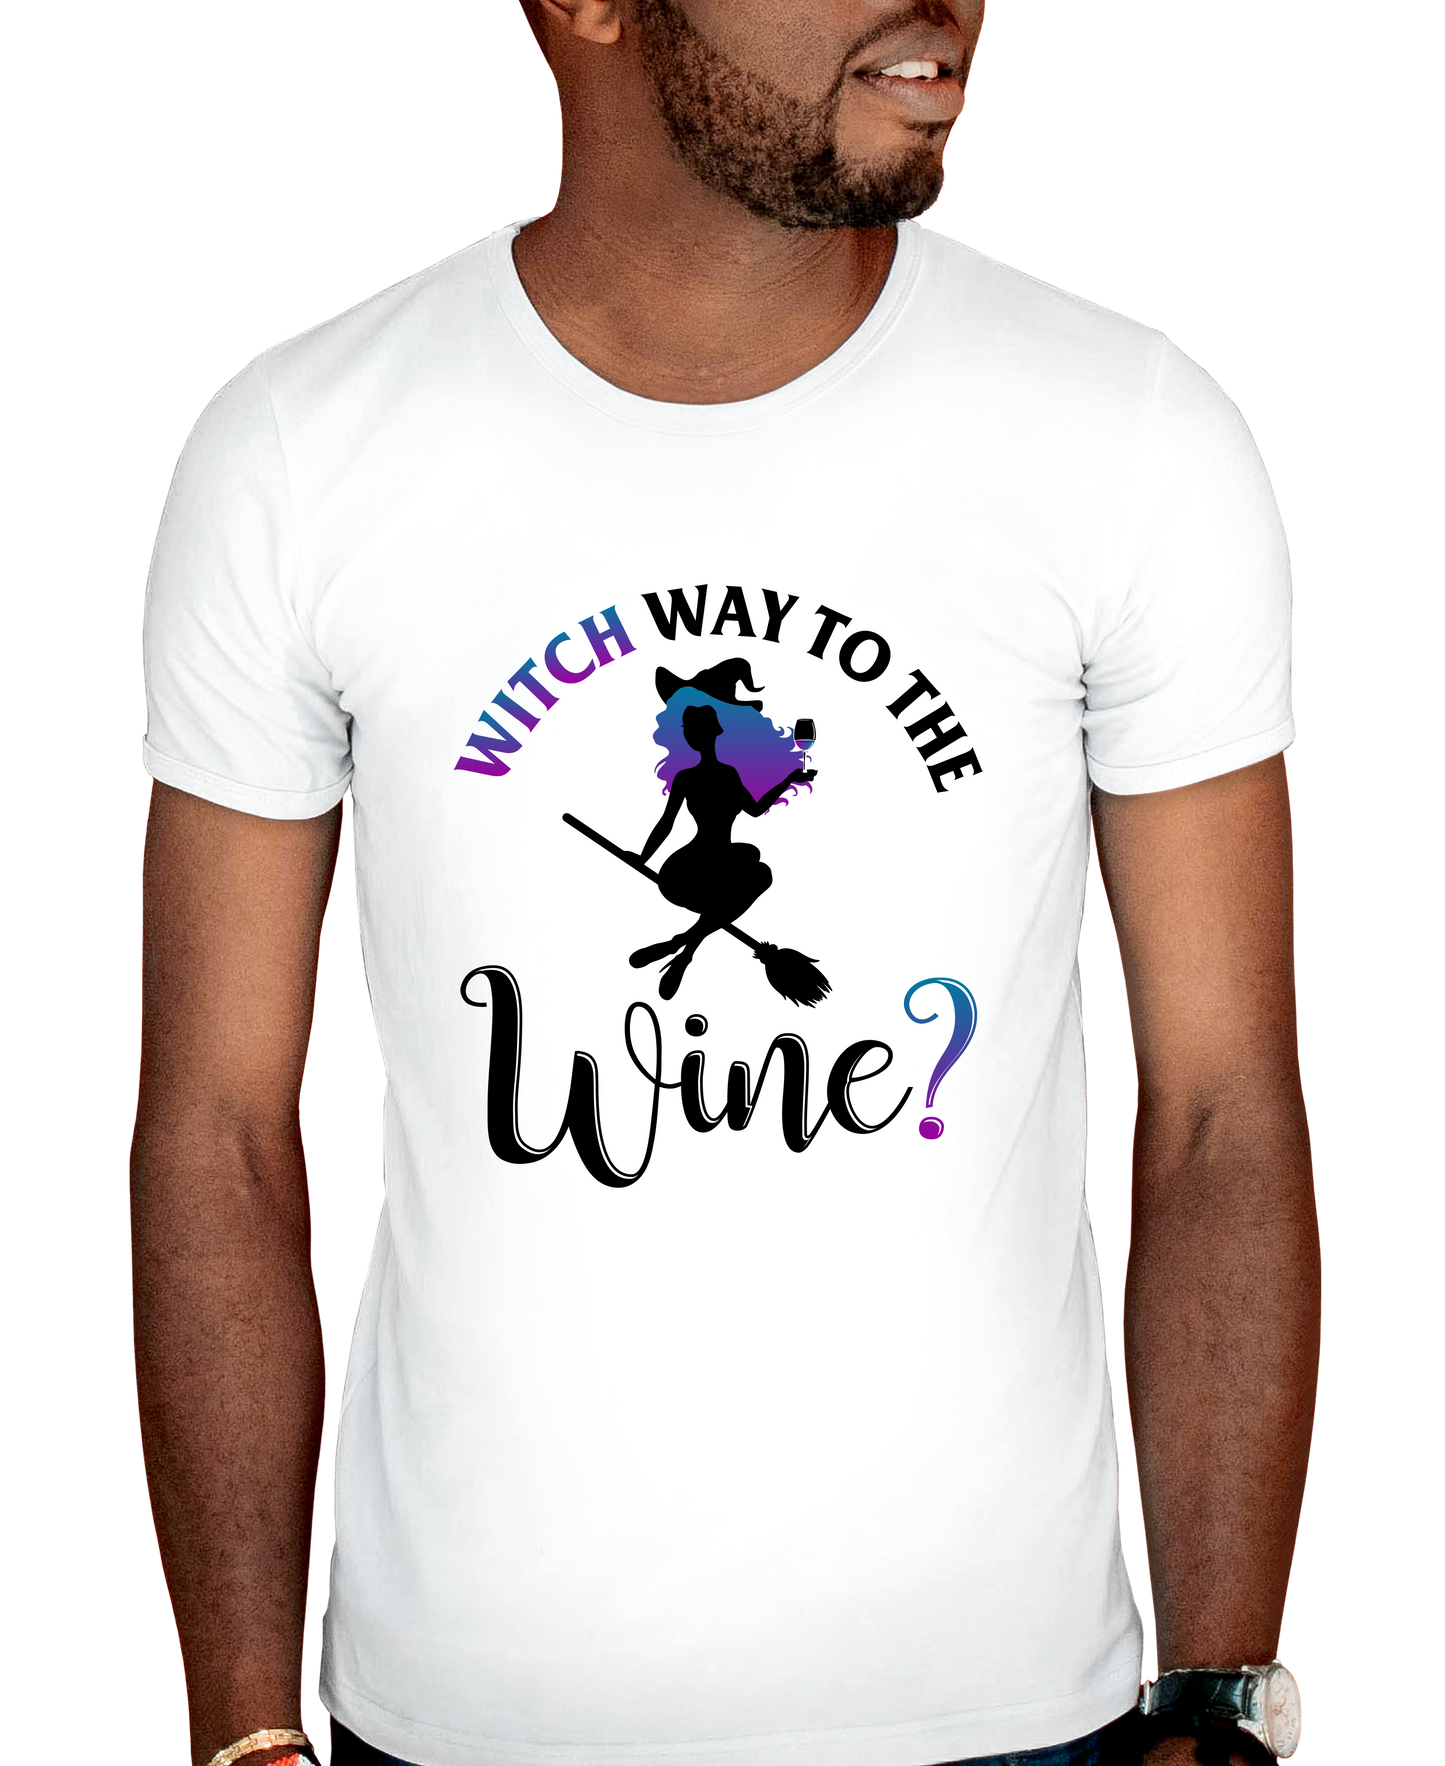 Witch Way To The Wine Adult Short Sleeve Tee